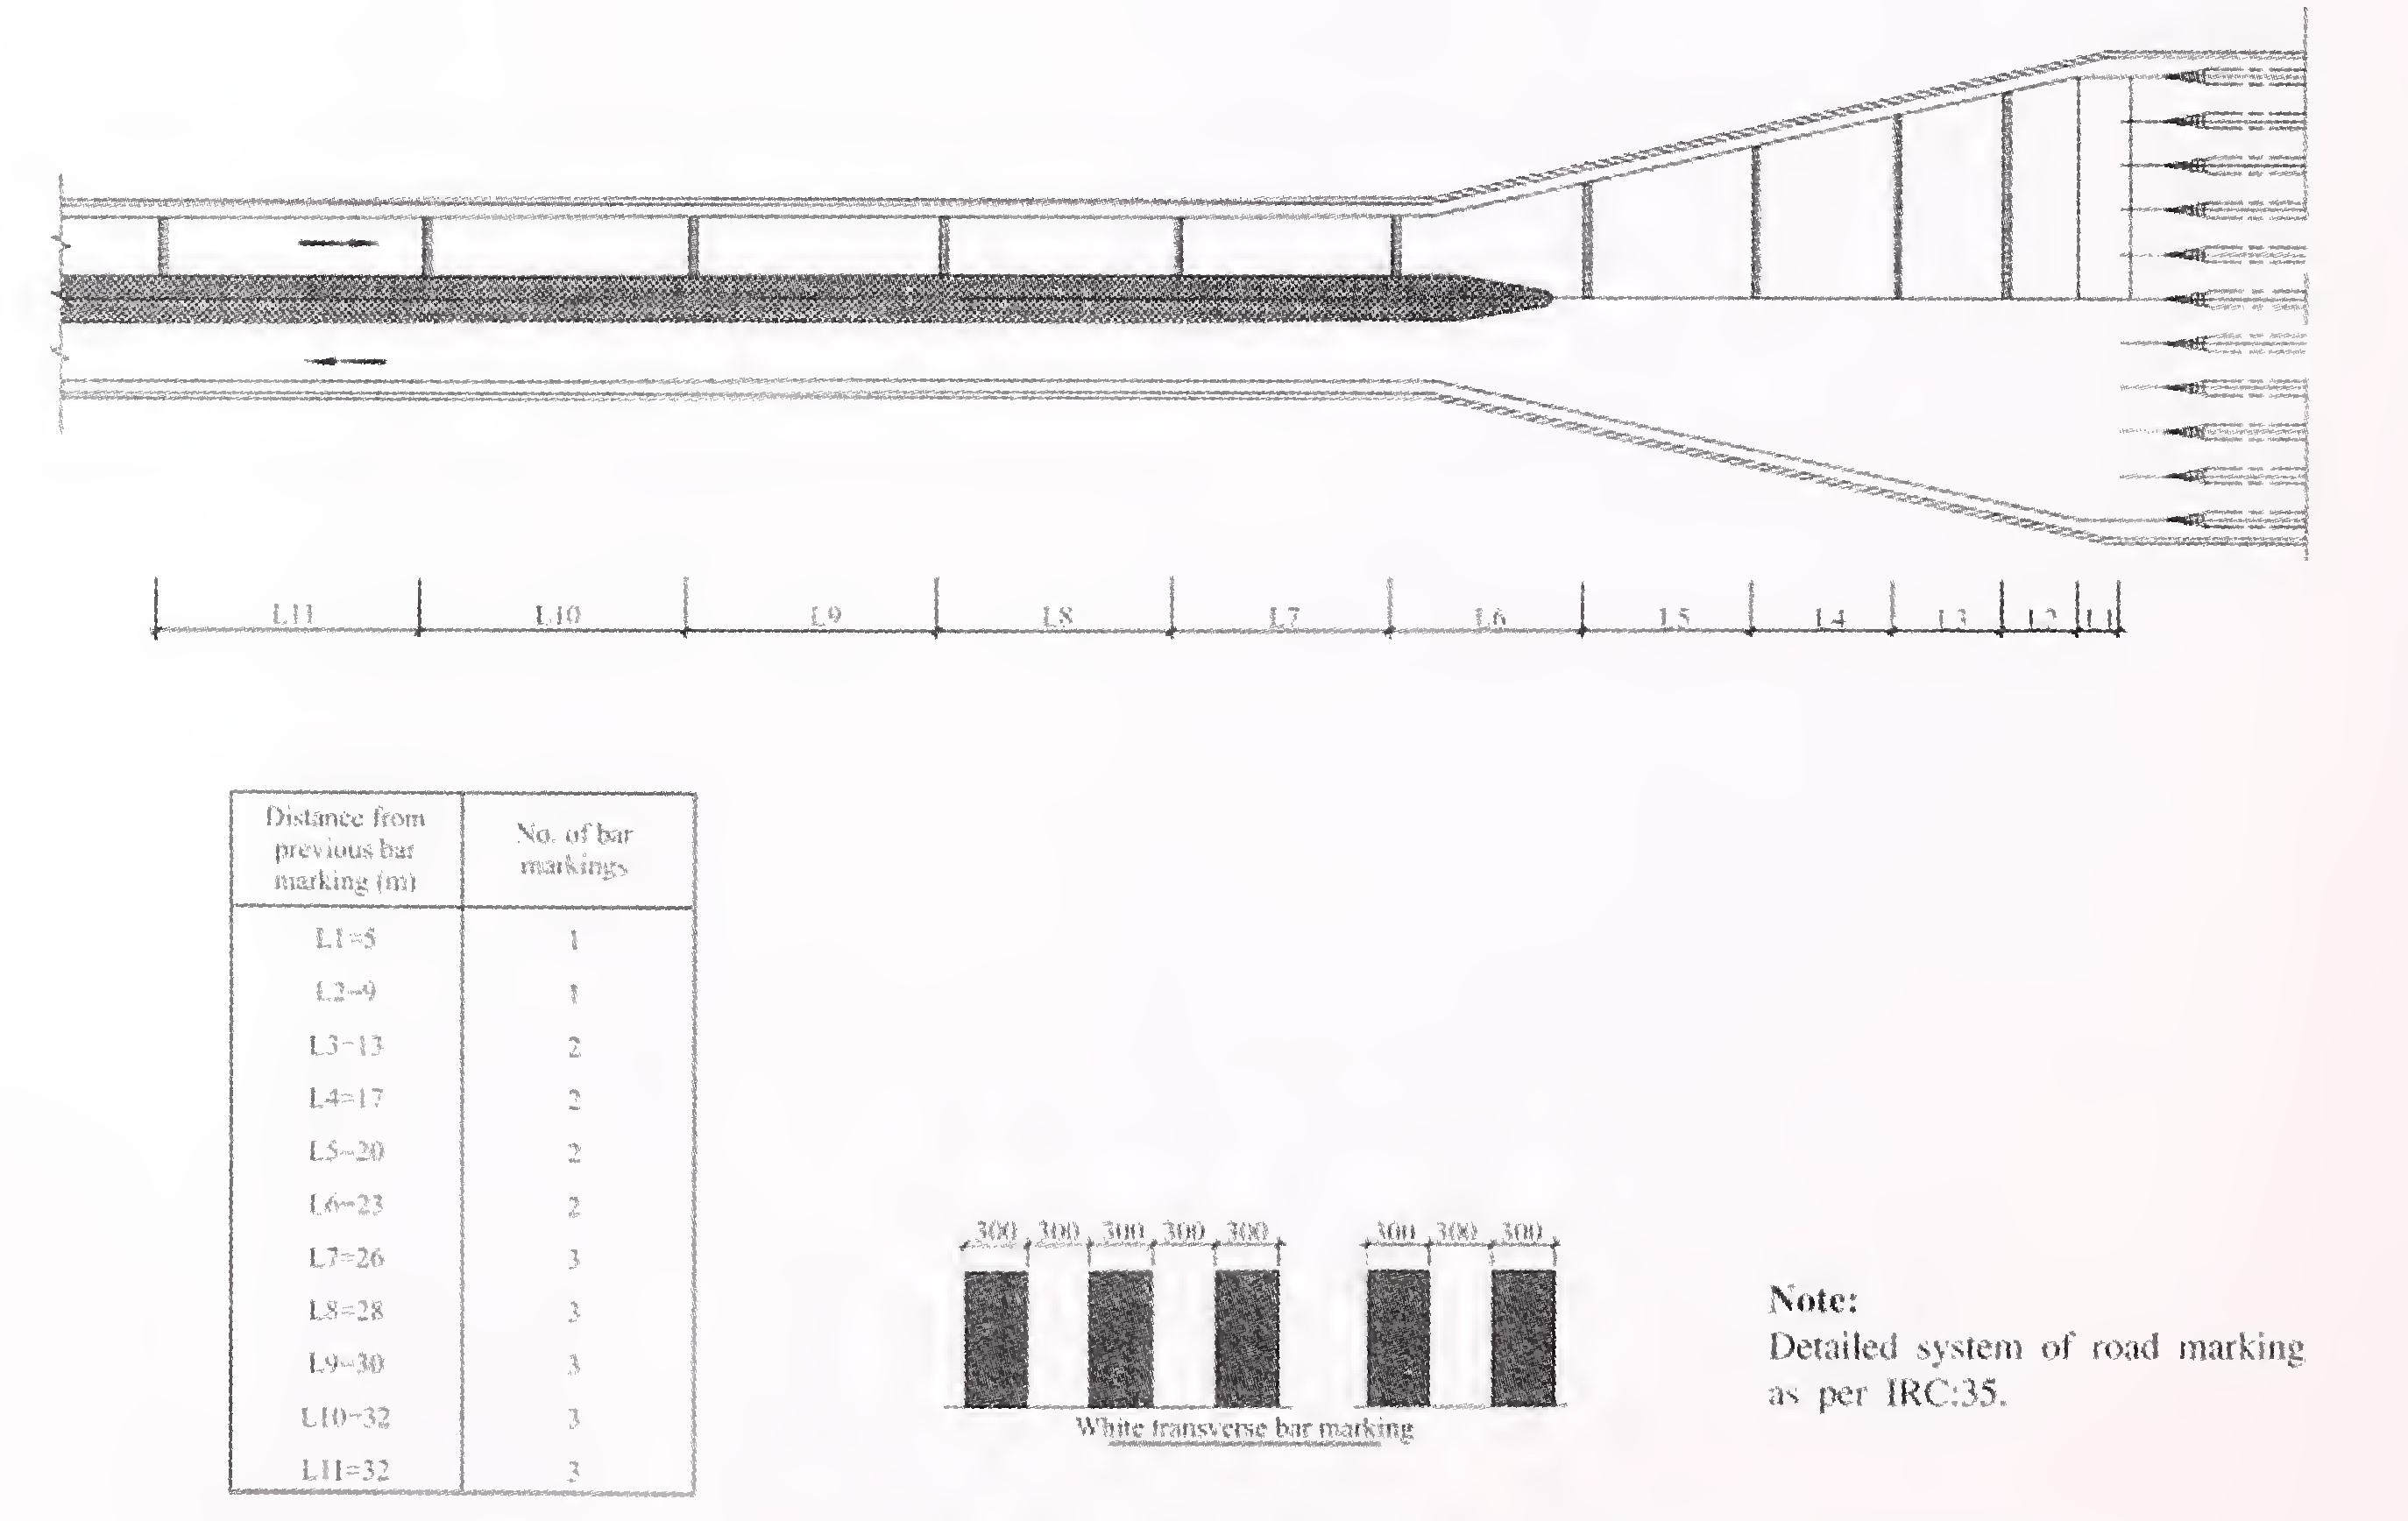 Fig. 12.7 Details of Suggestive Transverse Bar IVIarking for Speed Control at Toll Plaza